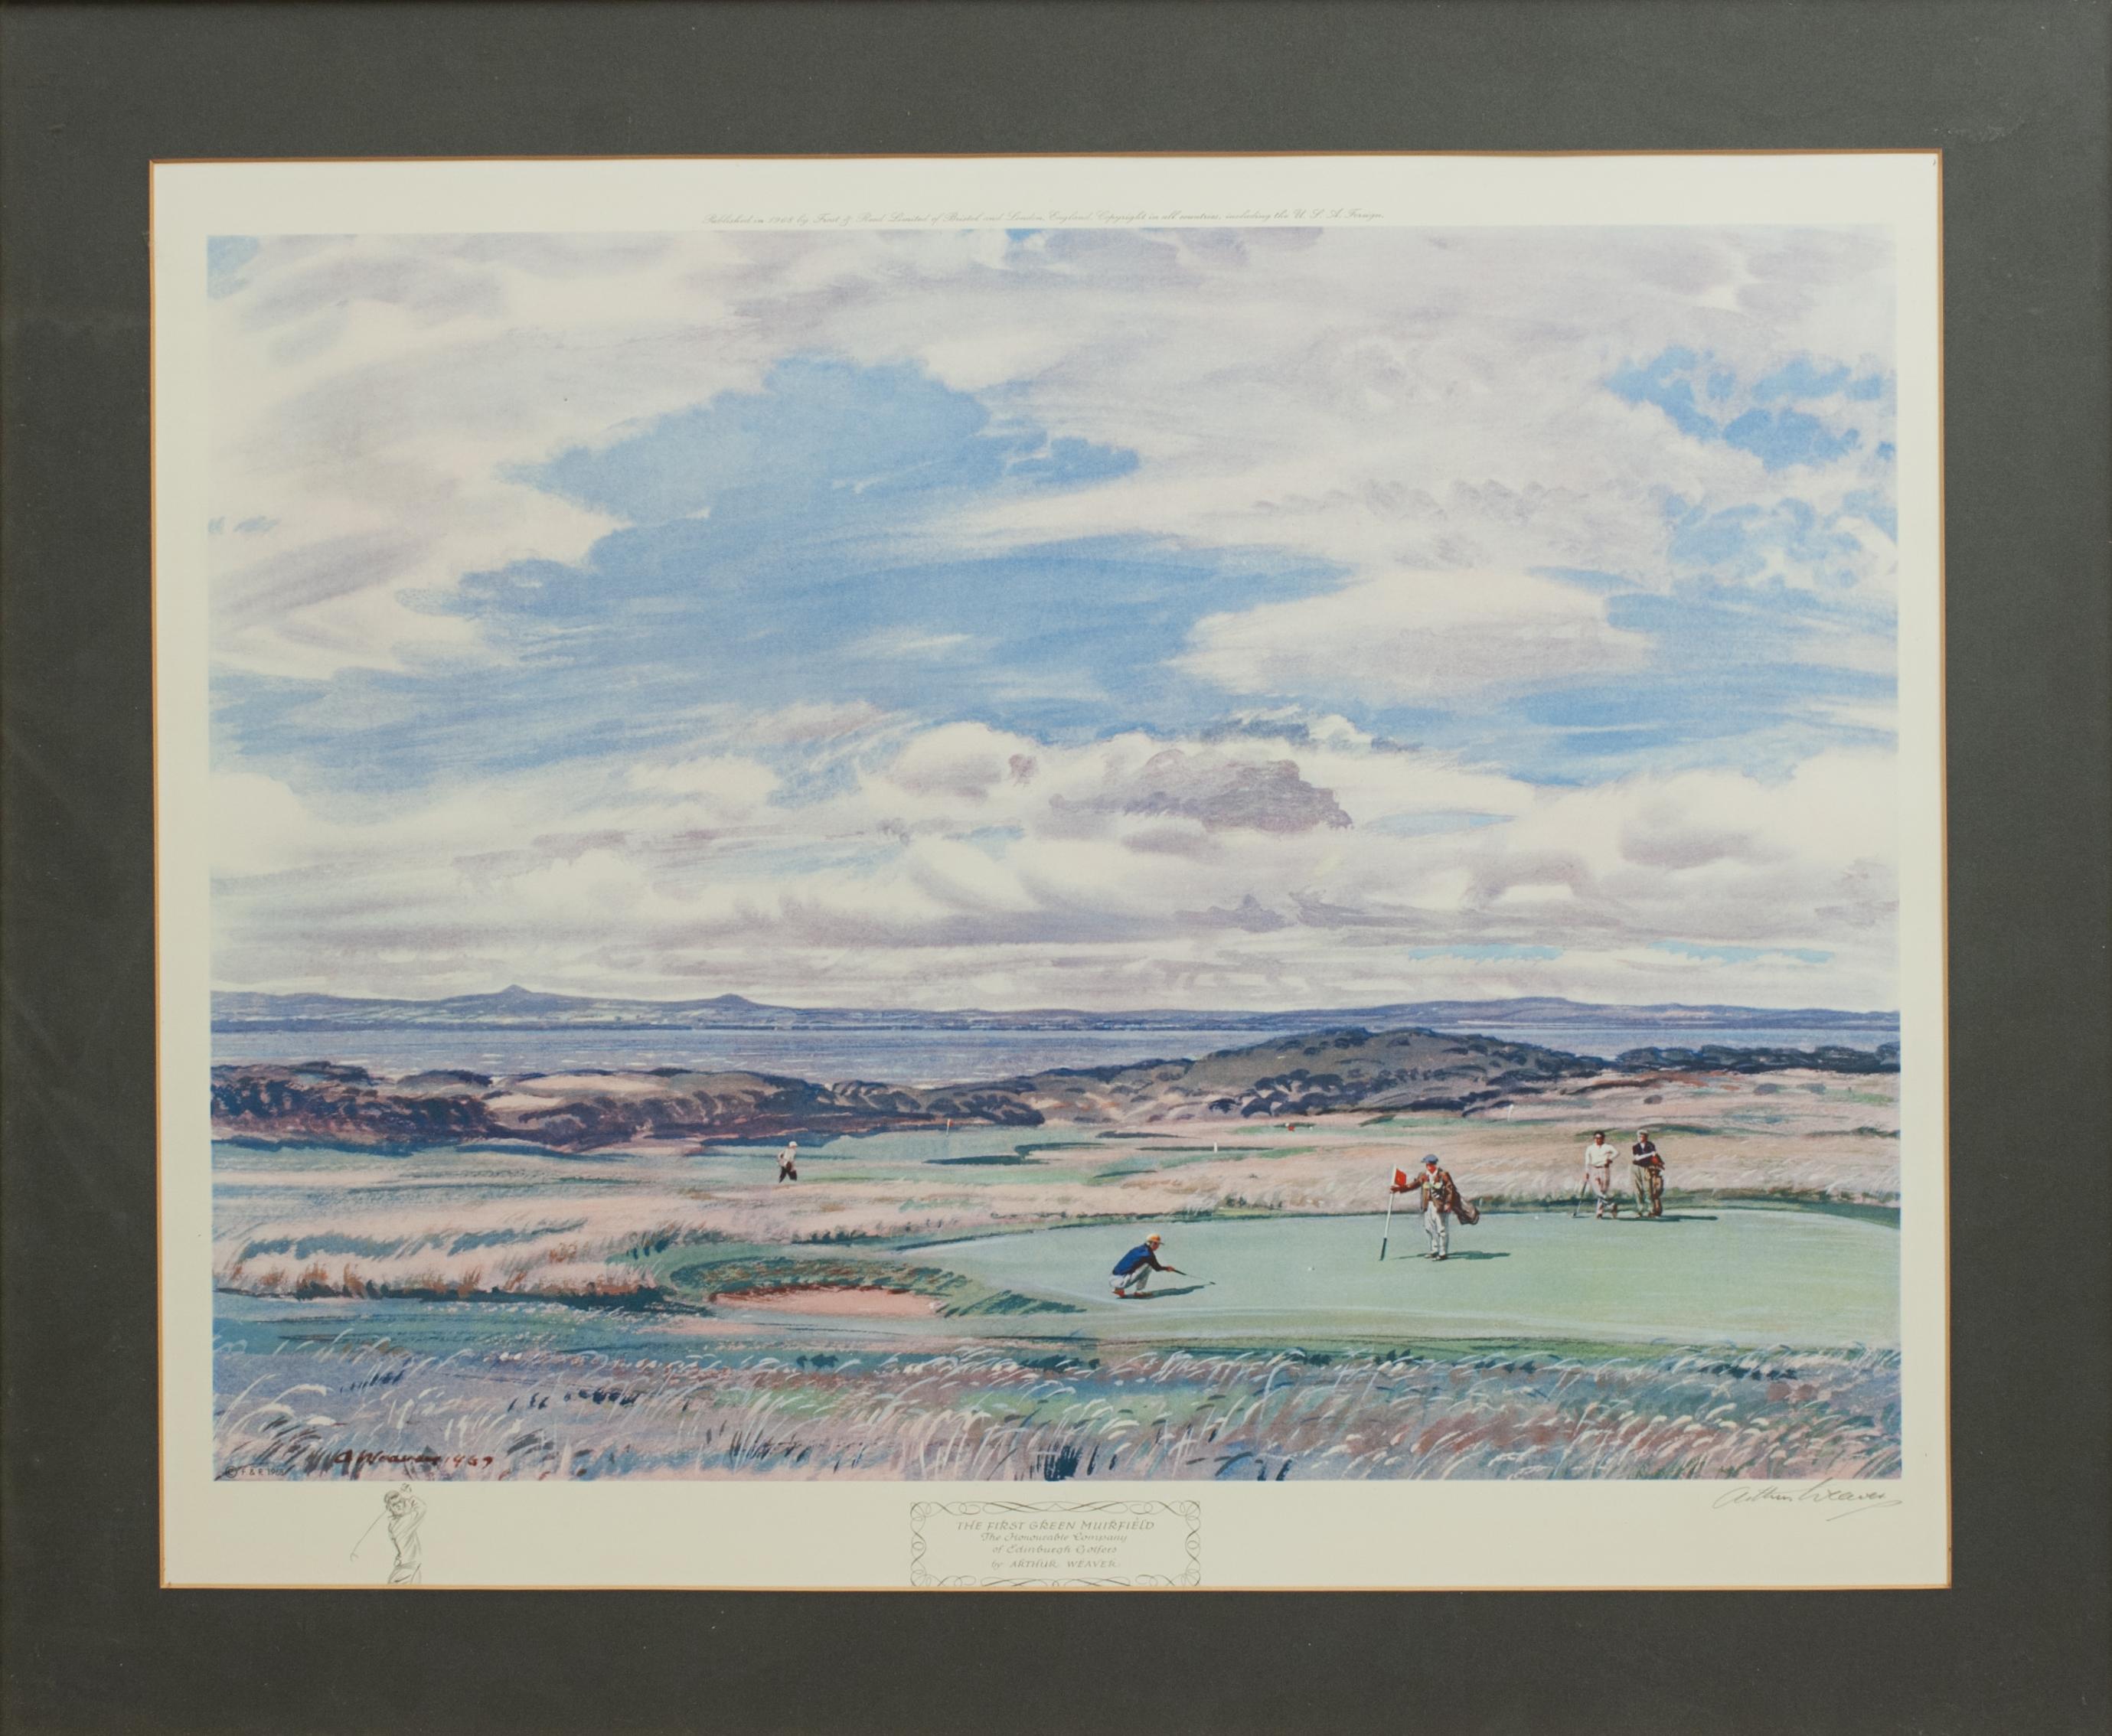 Golf print by Arthur Weaver, First Green Muirfield.
Colourful golf print 'First Green Muirfield, The Honourable Company Of Edinburgh Golfers' by Arthur Weaver, published 1968 by Frost & Reed Limited of Bristol and London. The print is signed in